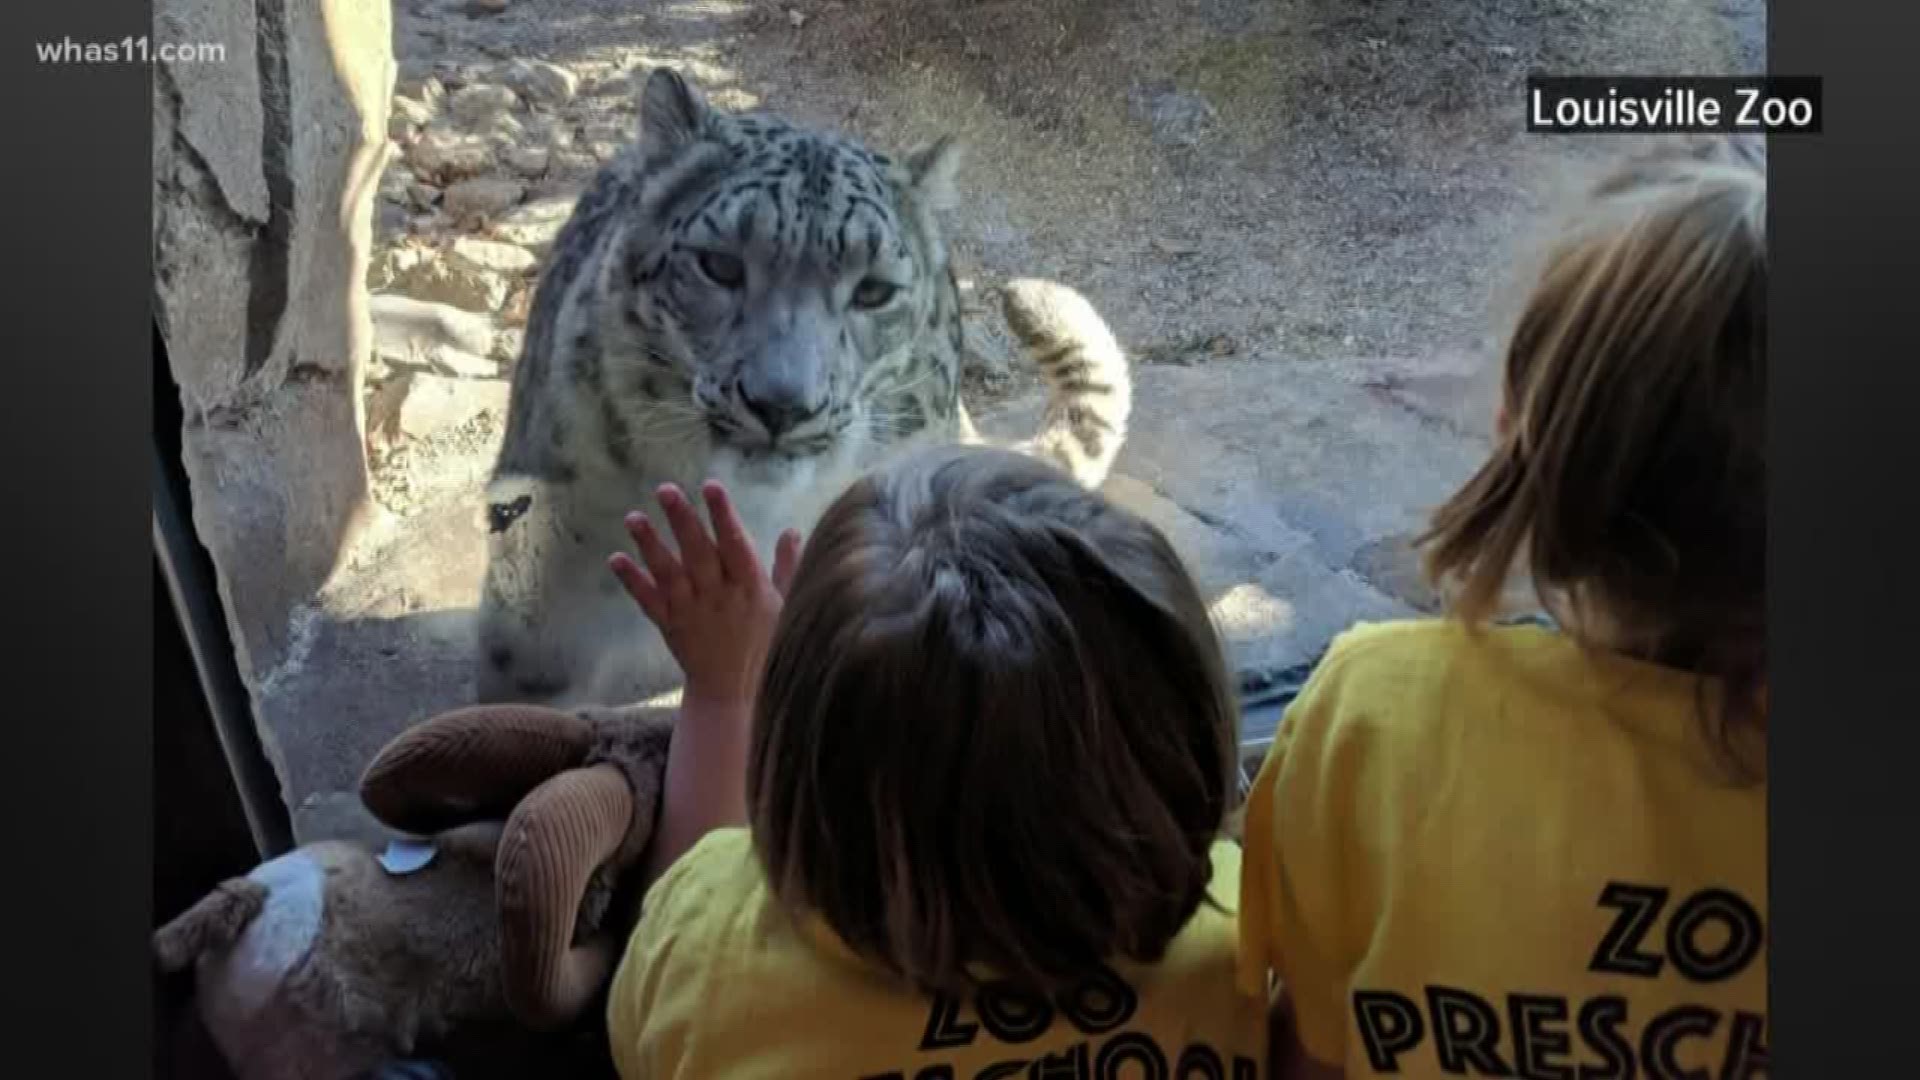 The Snow Leopard Pass is now open at the Louisville Zoo!